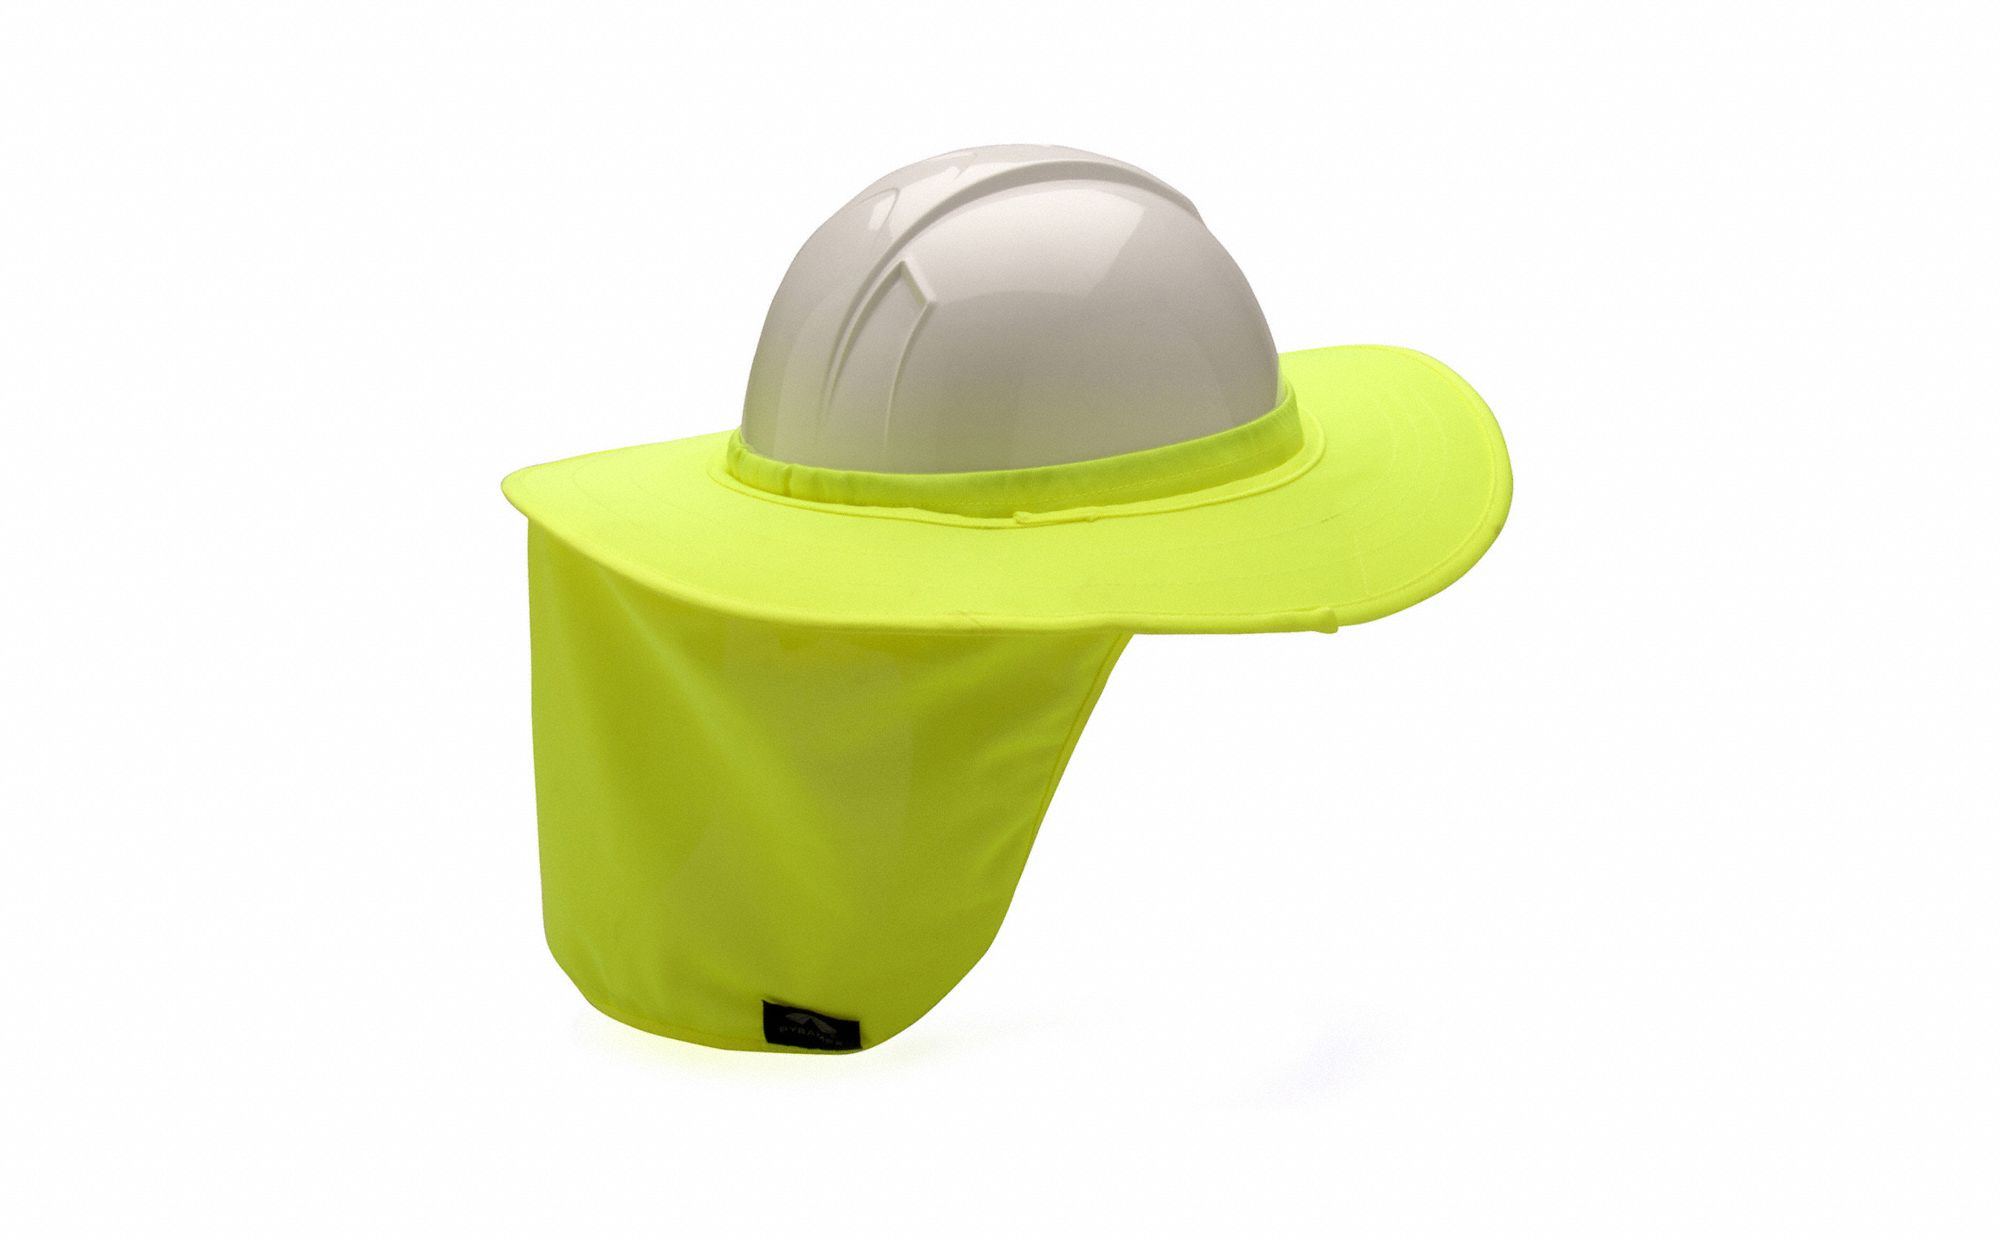 Pyramex Safety Products Hard Hat Brim with Neck Shade hard hat